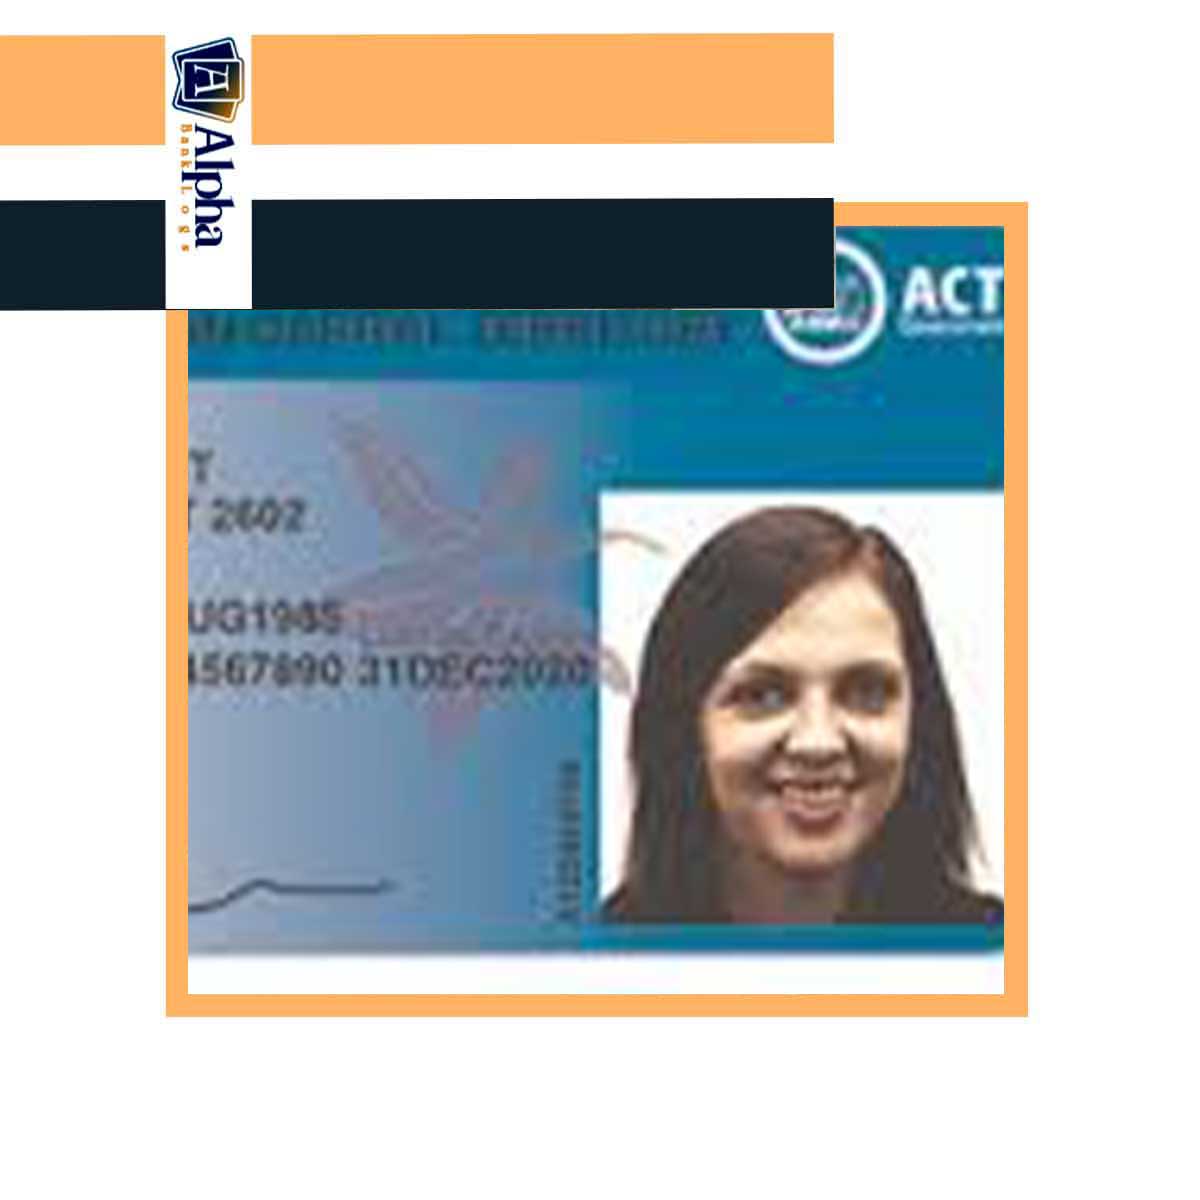 1 x Australian Fulls Employee Complete Identity Pack (DL,TFN,more) EXTRA DOCUMENTS!